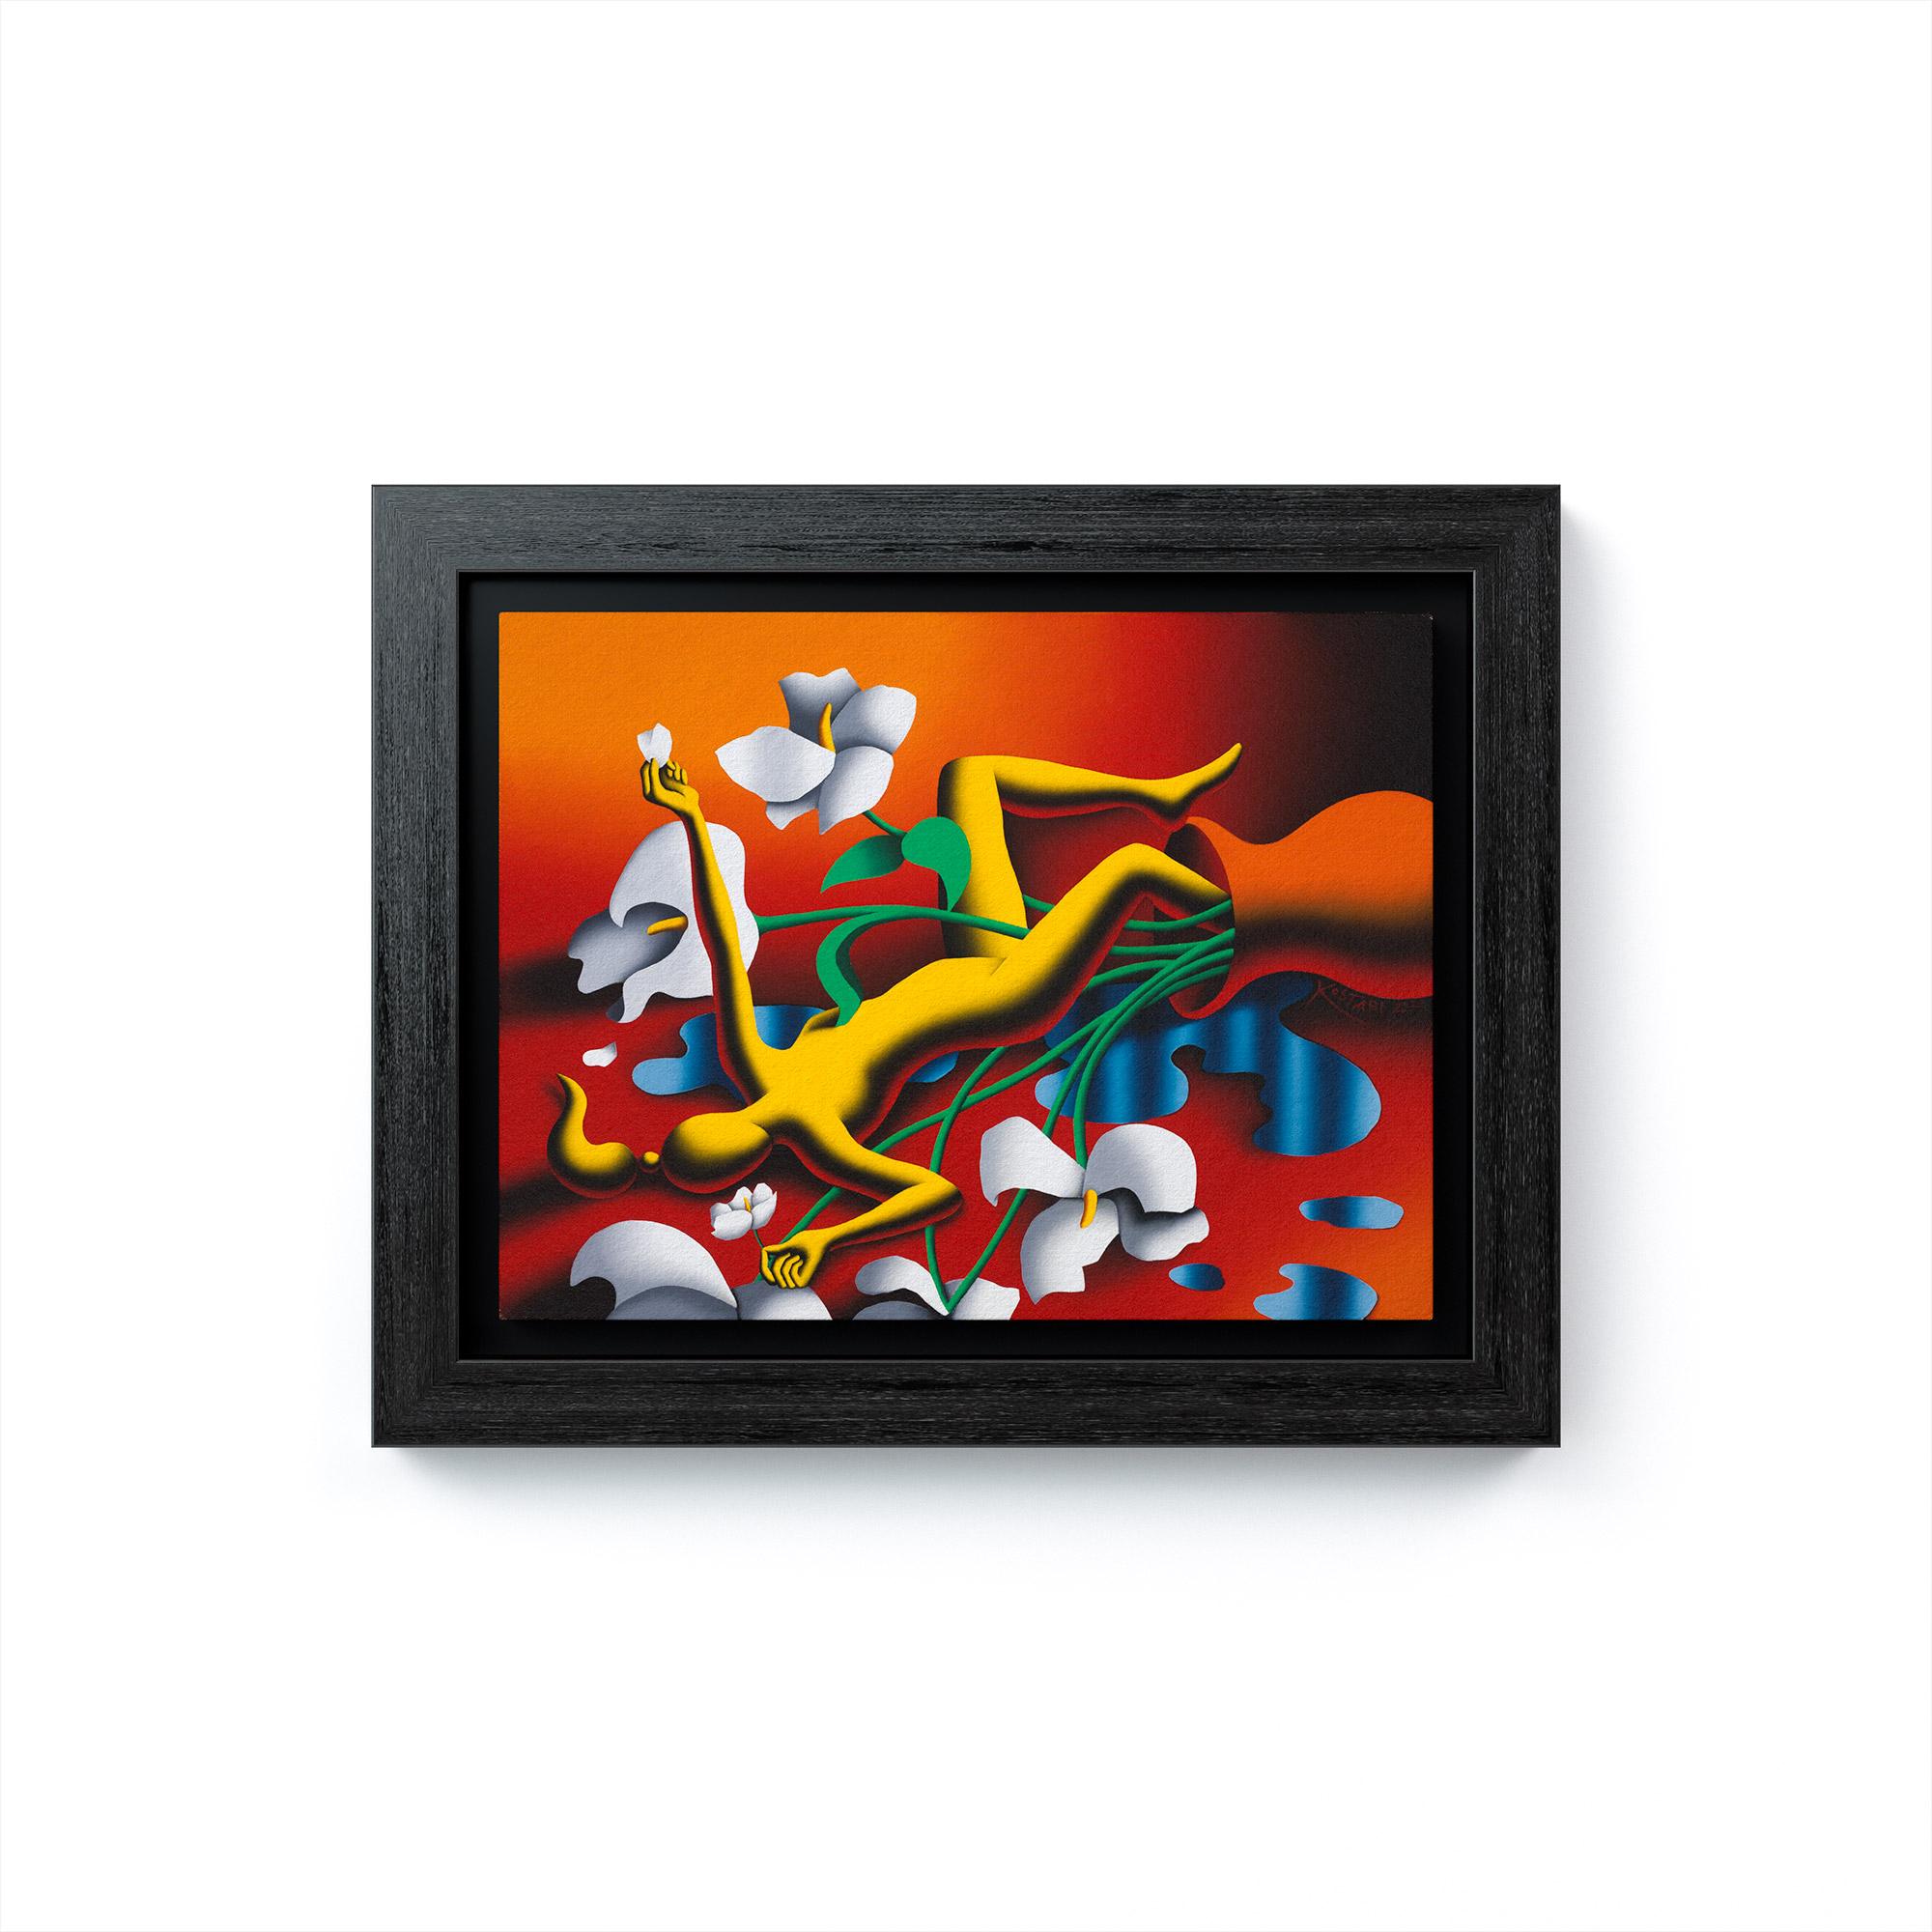 Golden are the Days of Memory - Painting by Mark Kostabi